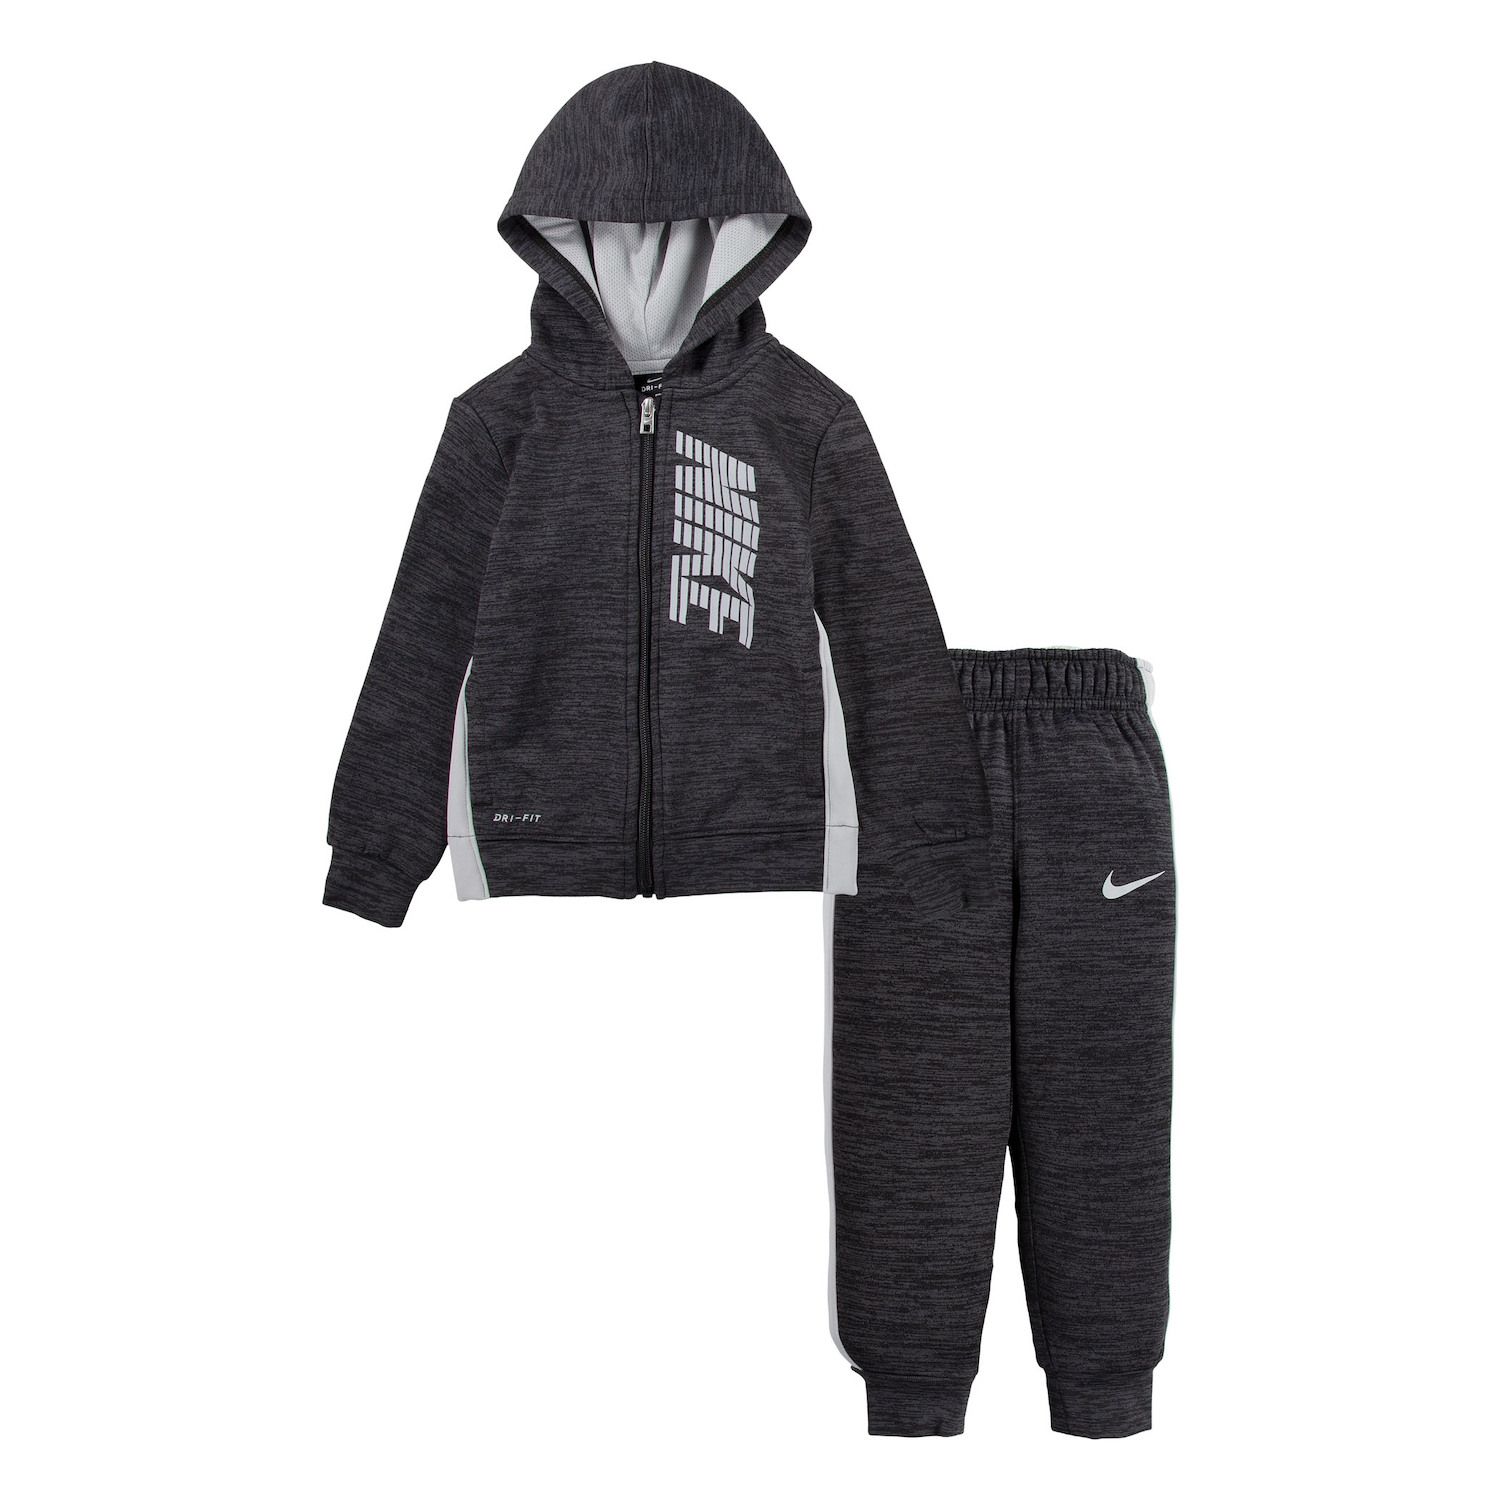 3t nike outfit